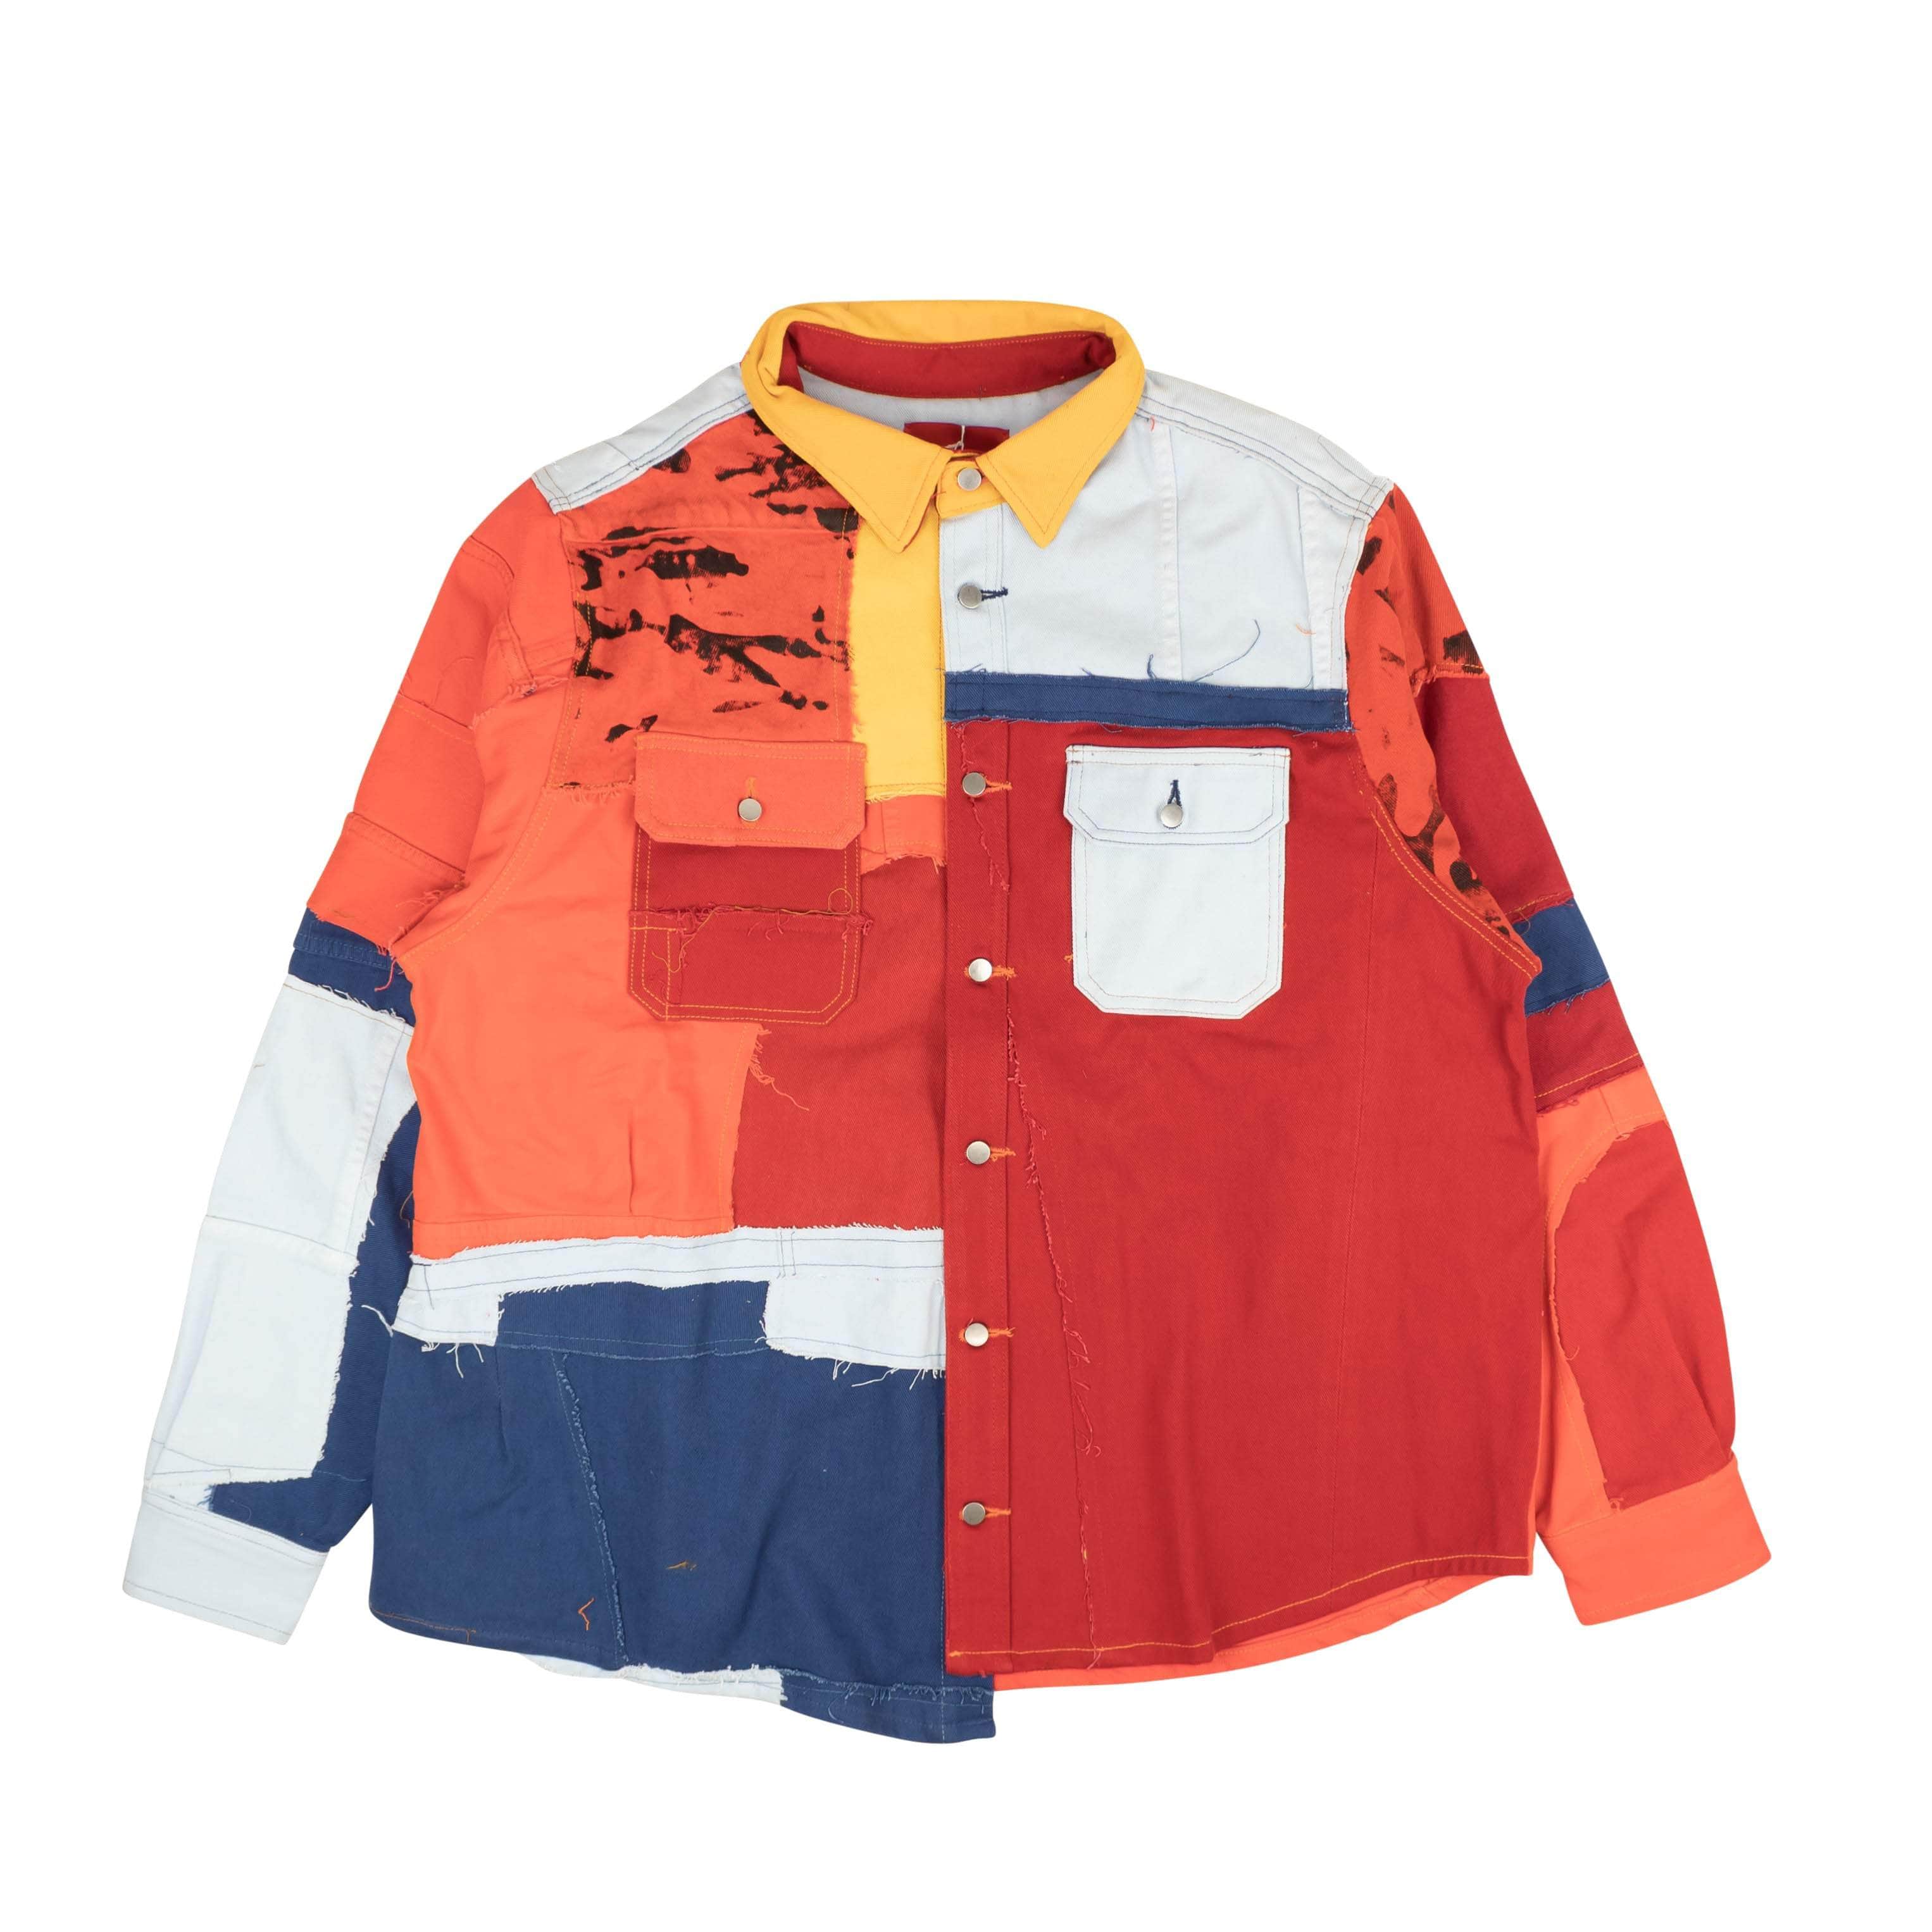 424 ON FAIRFAX 424-on-fairfax, 500-750, channelenable-all, chicmi, couponcollection, gender-mens, main-clothing, mens-shoes, size-l, size-m, size-xl Multicolor Reworked Work Button Down Shirt